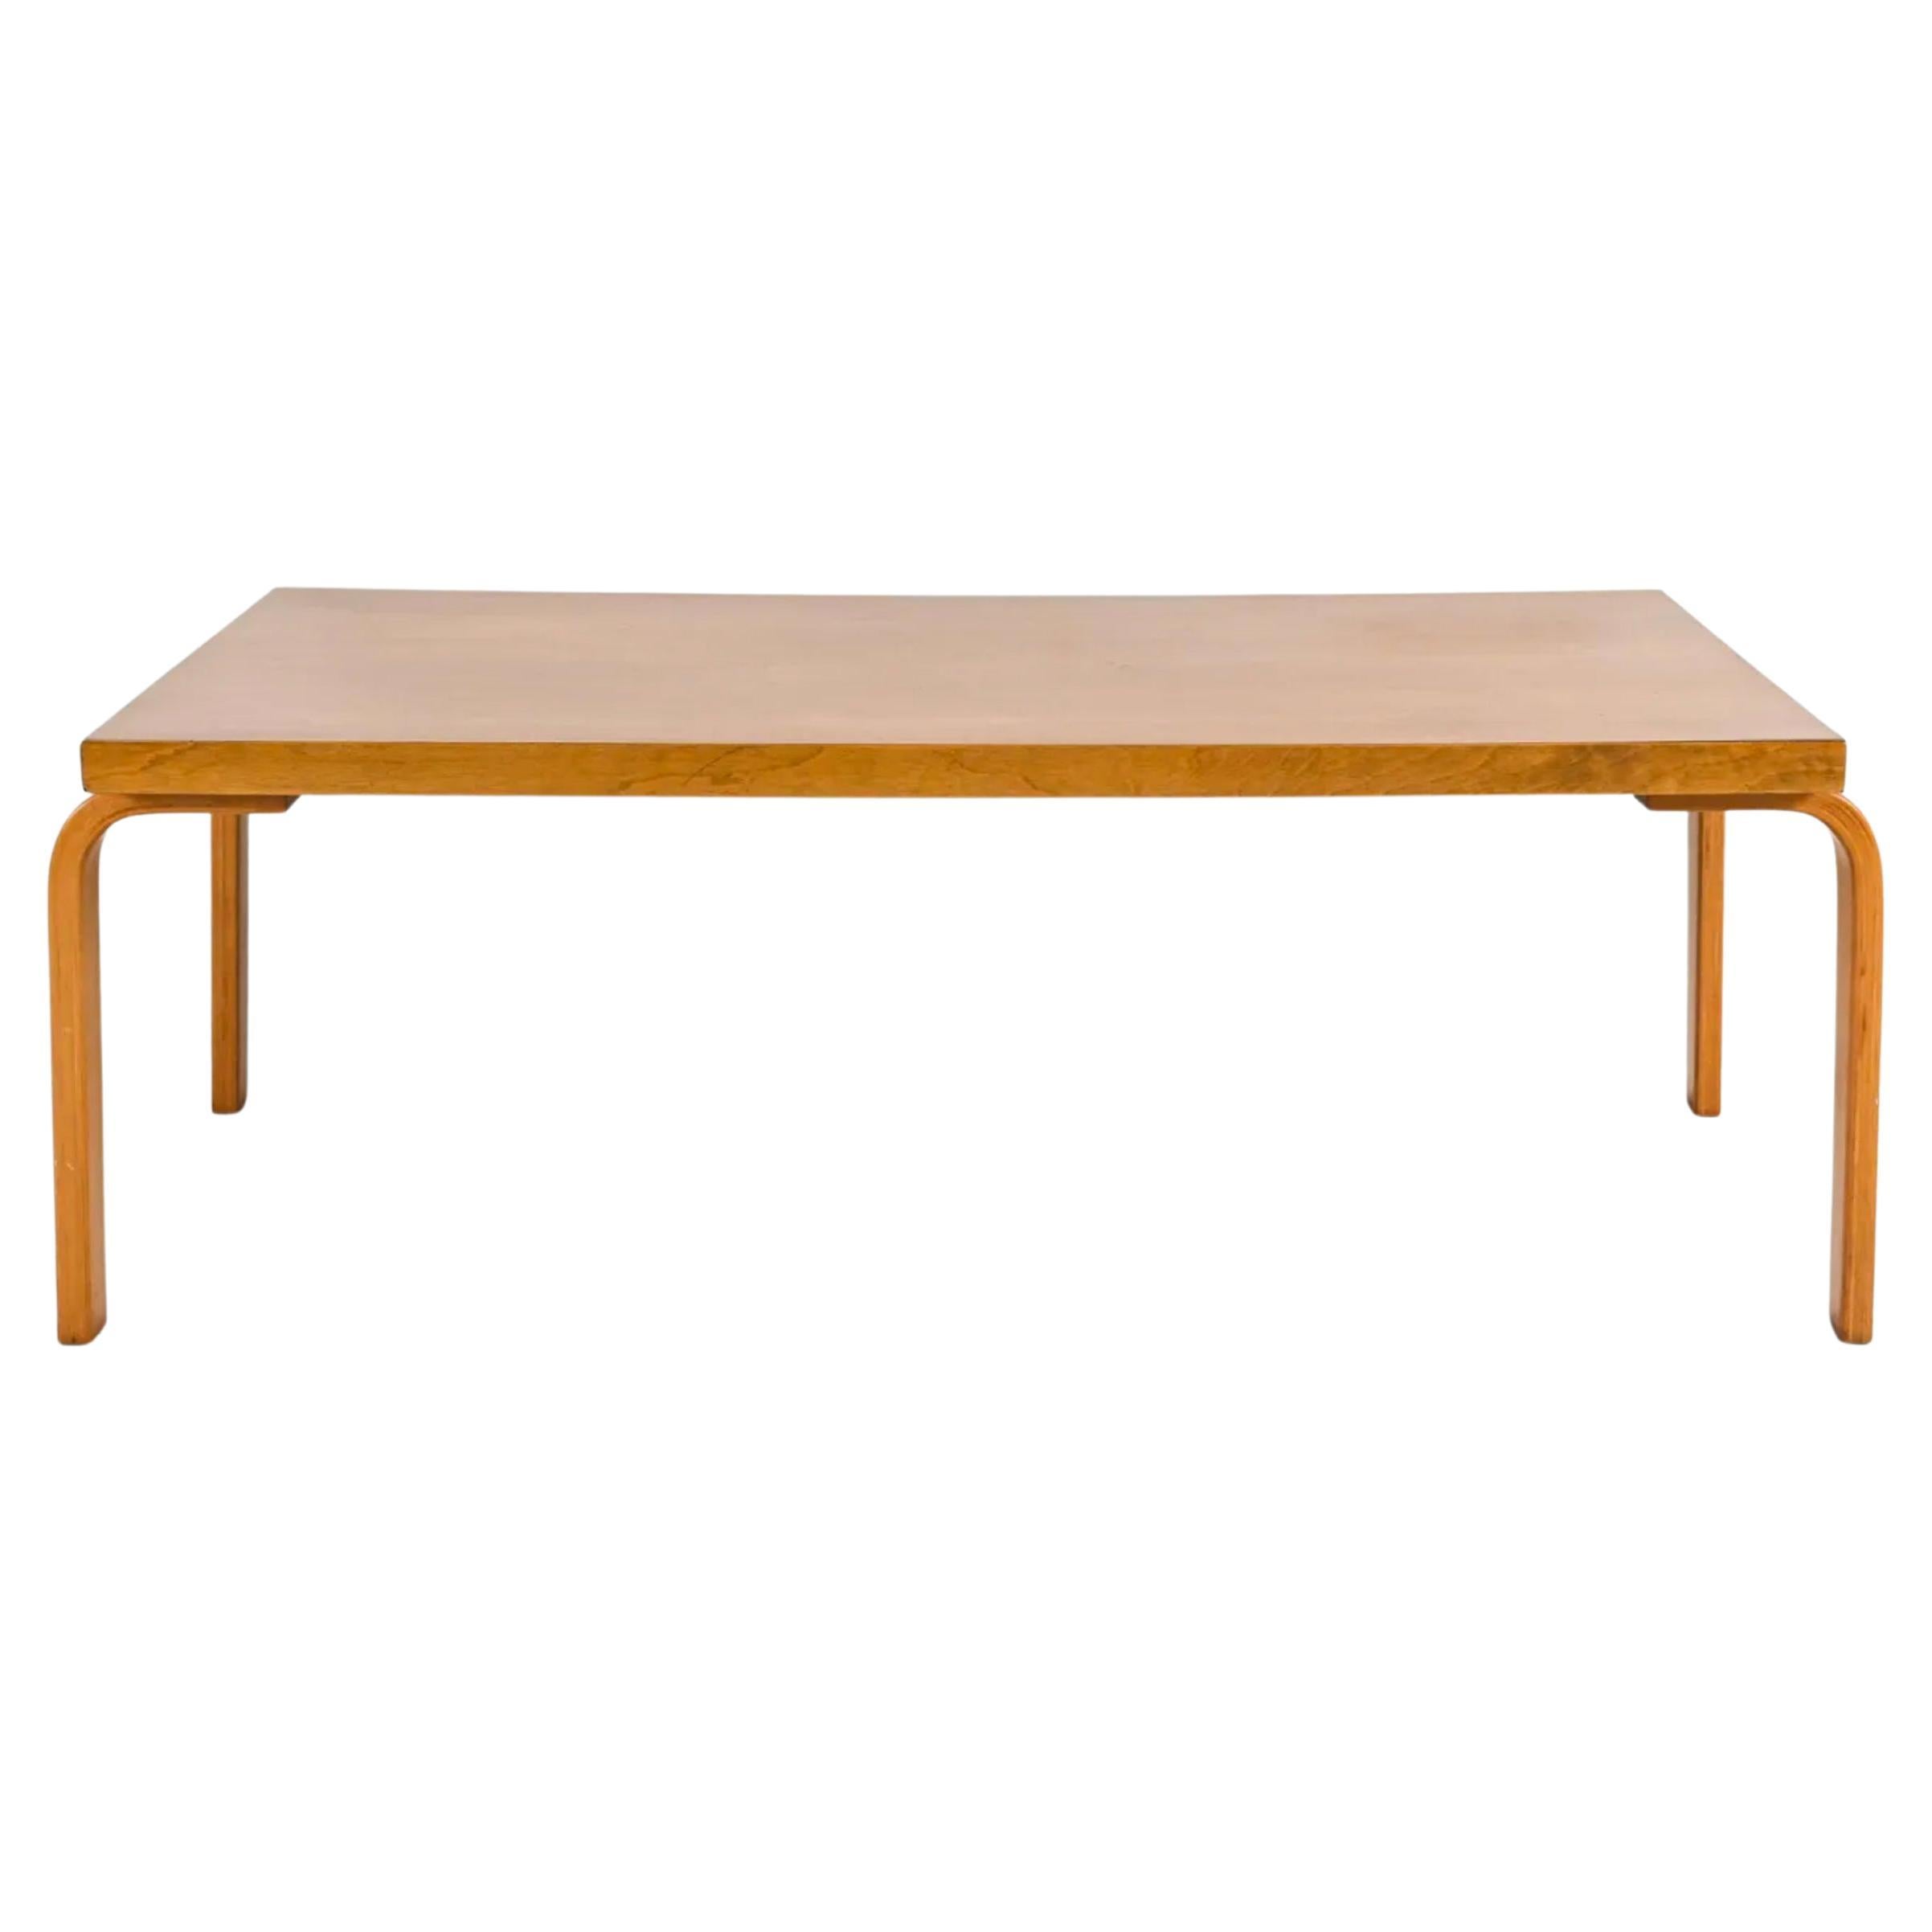 Midcentury Alvar Aalto Blonde Birch Bentwood Leg Coffee Table or Bench For Sale